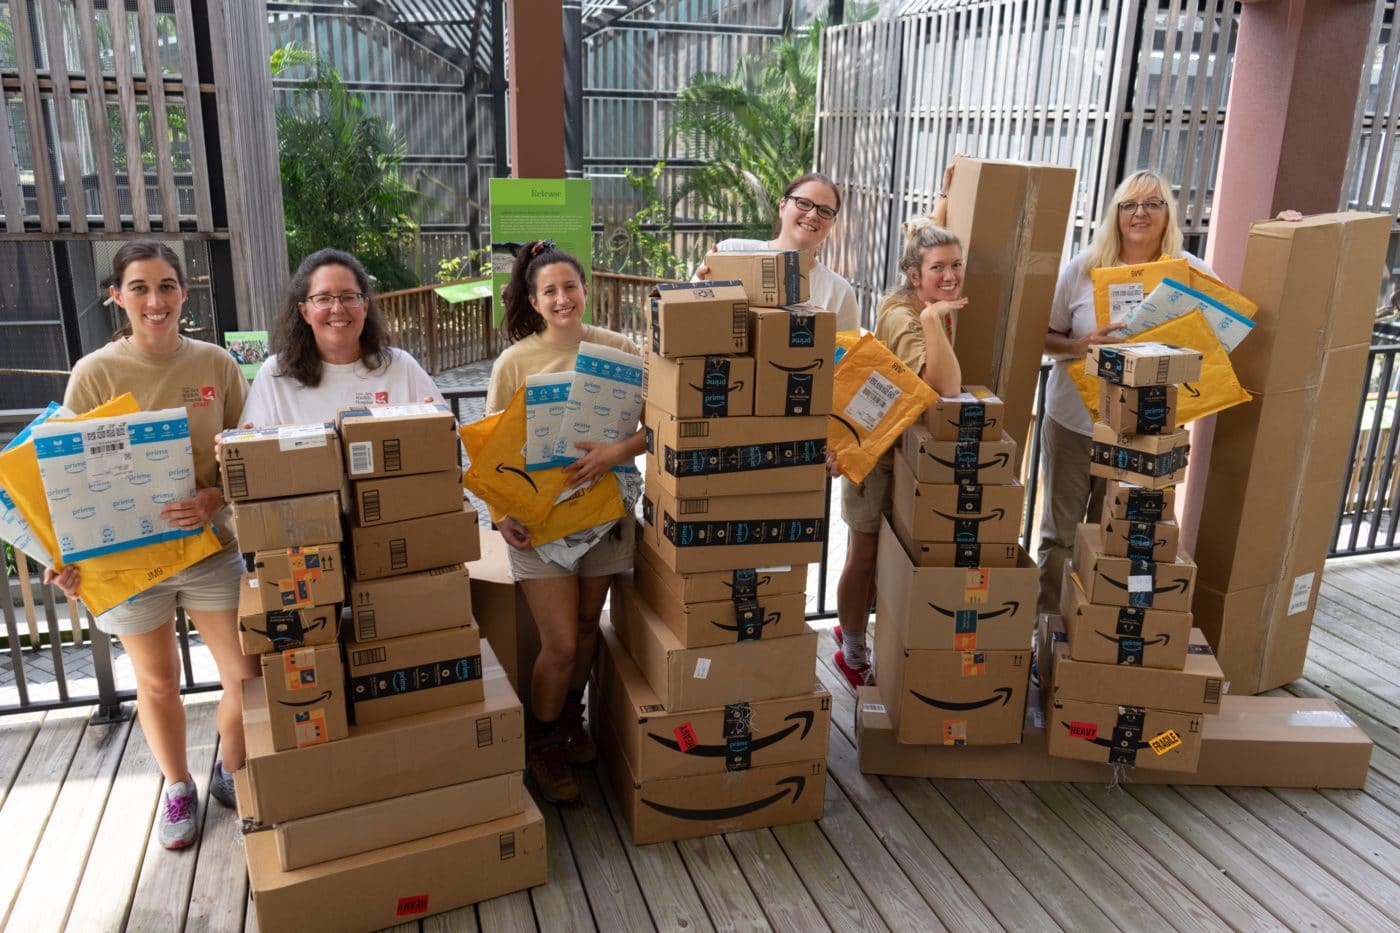 Wildlife staff in front of packages sent in from Amazon Wish LIst